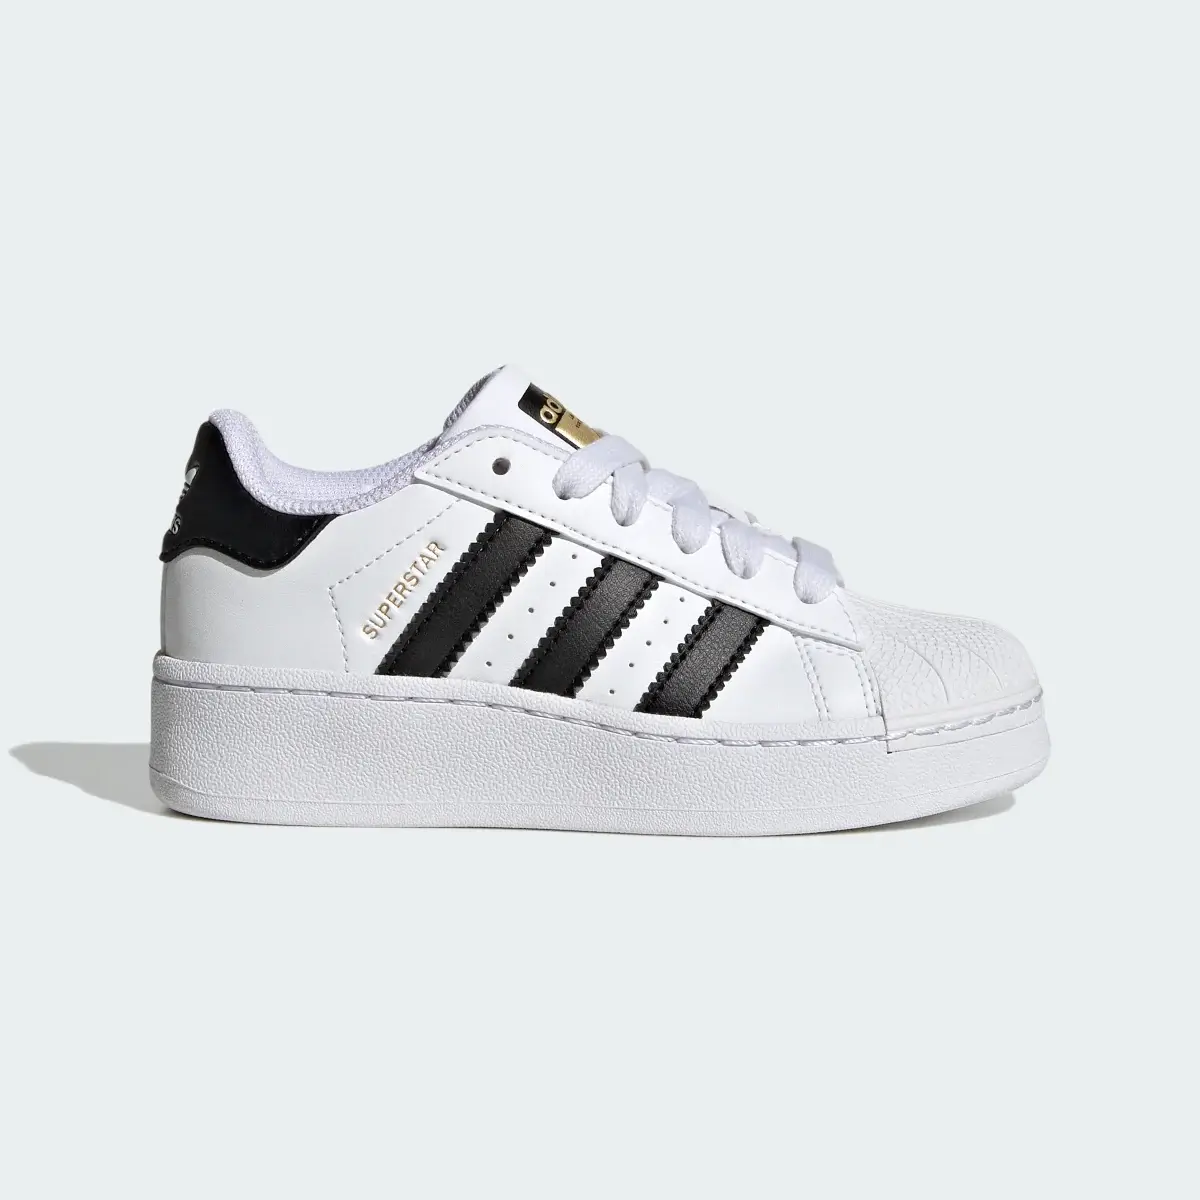 Adidas Superstar XLG Shoes Kids. 2